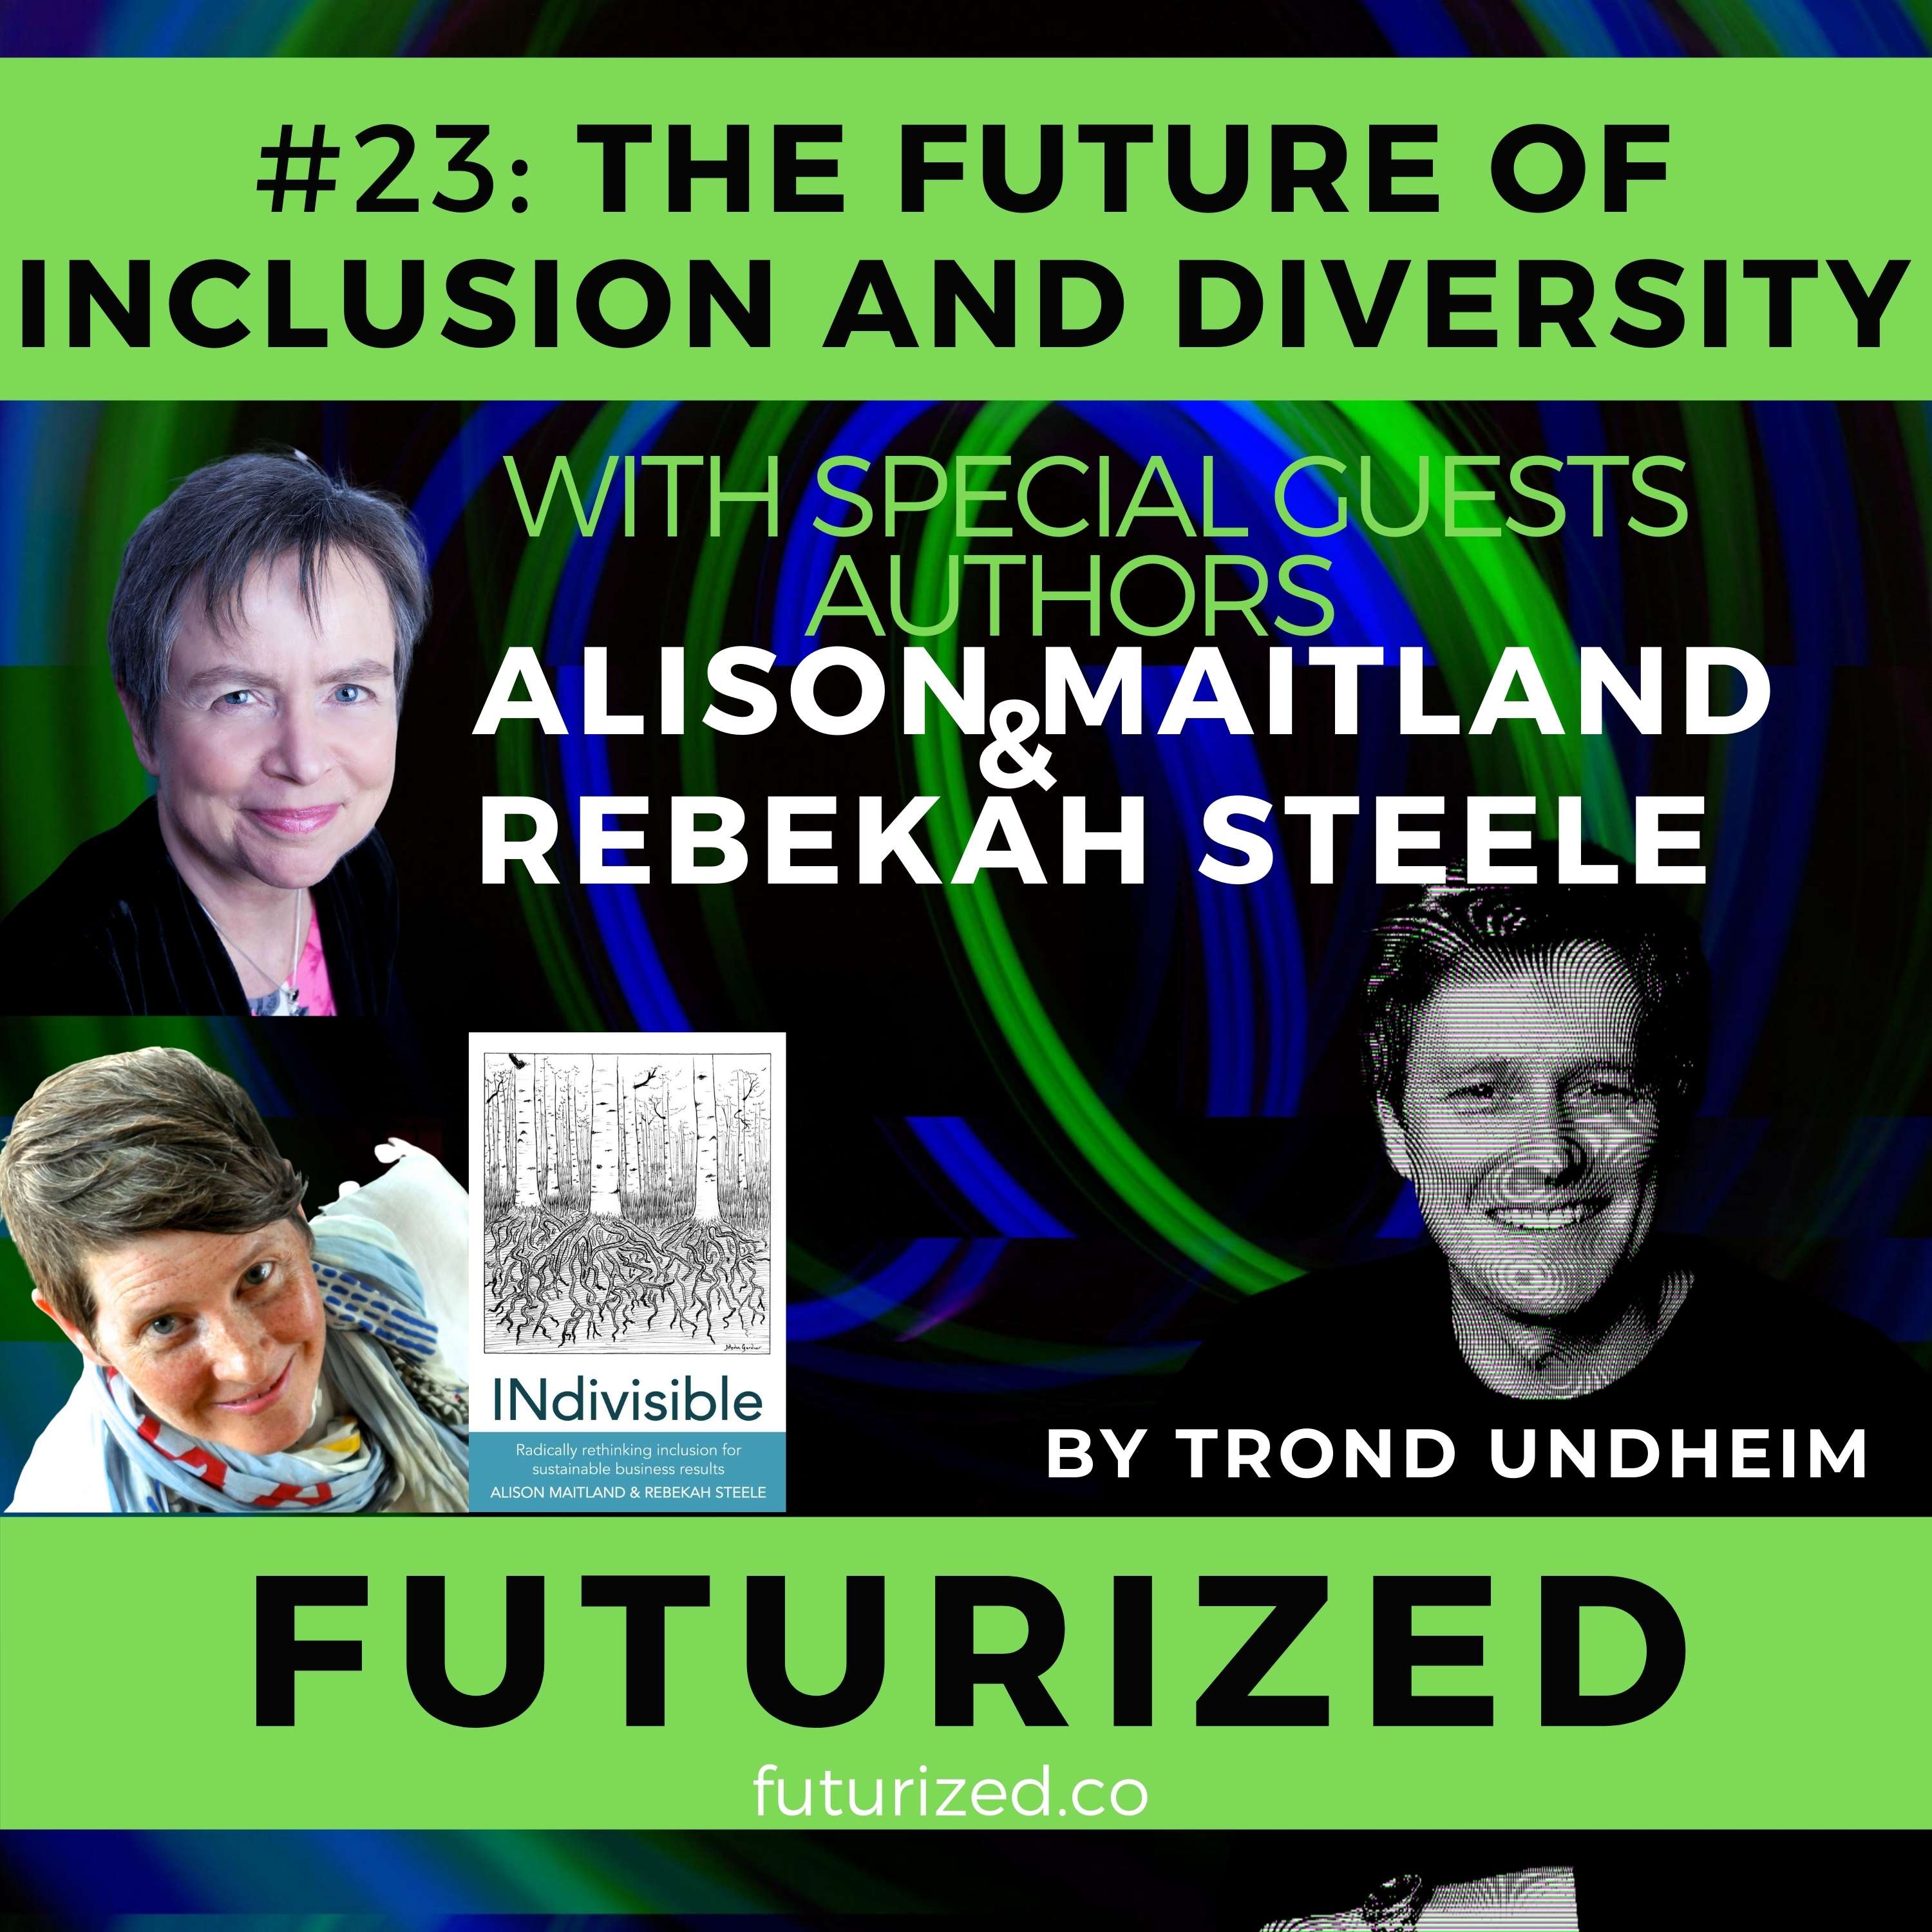 The Future of Inclusion and Diversity in Business Image